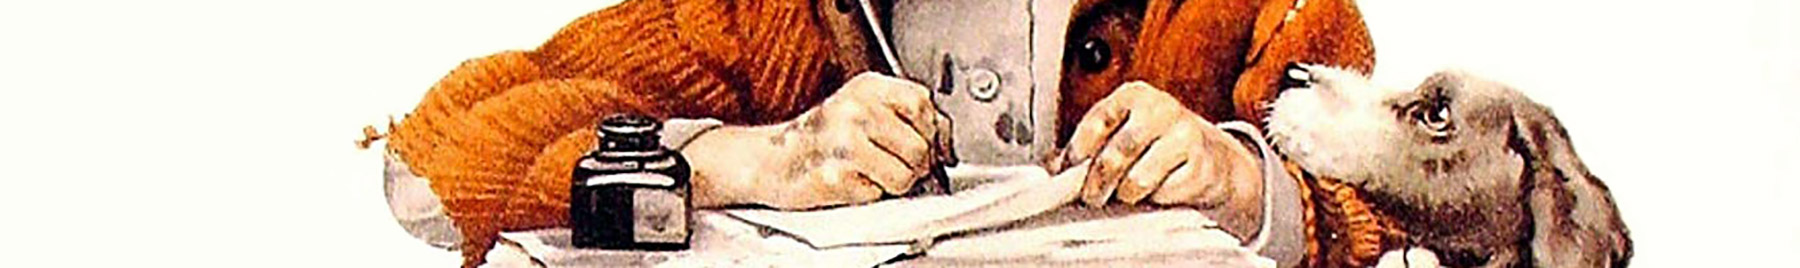 A detail of Little boy writing a letter, a painting by Norman Rockwell